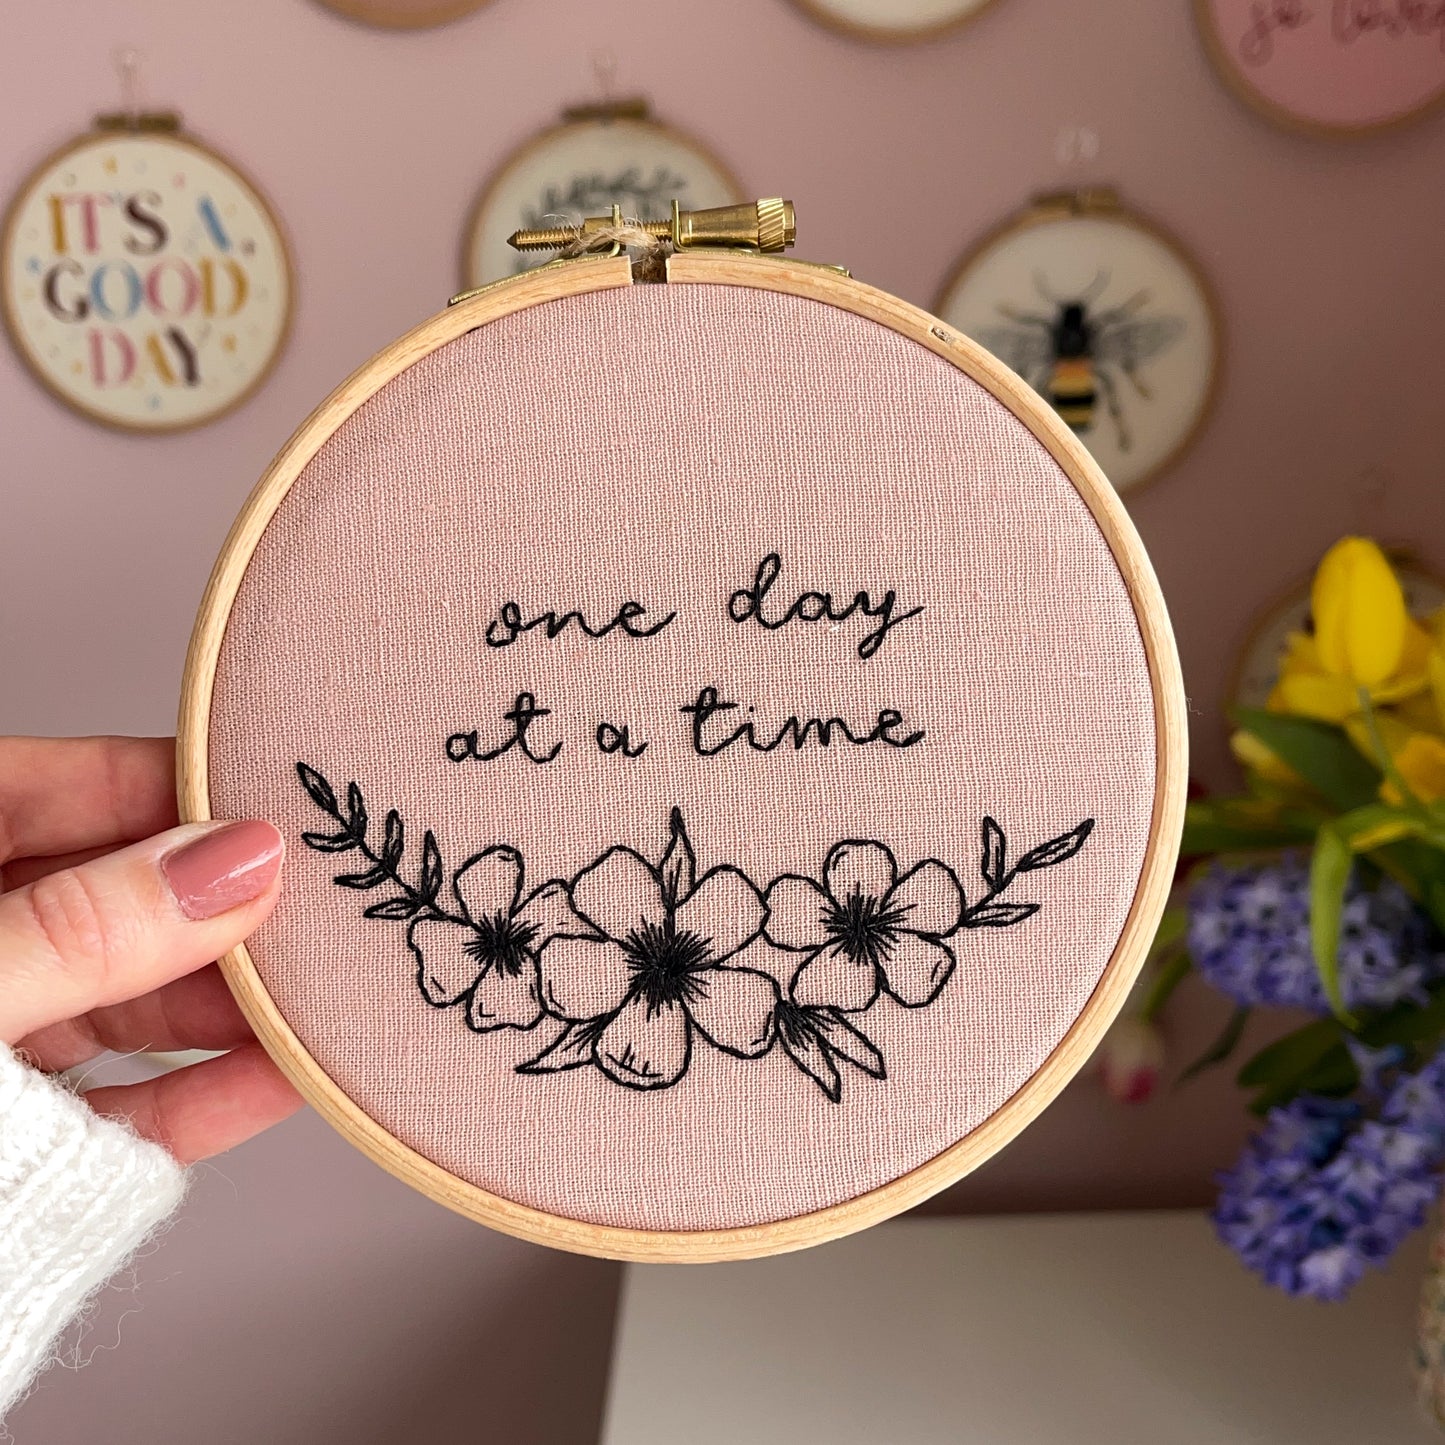 One Day At A Time Pink Hand Embroidery Hoop